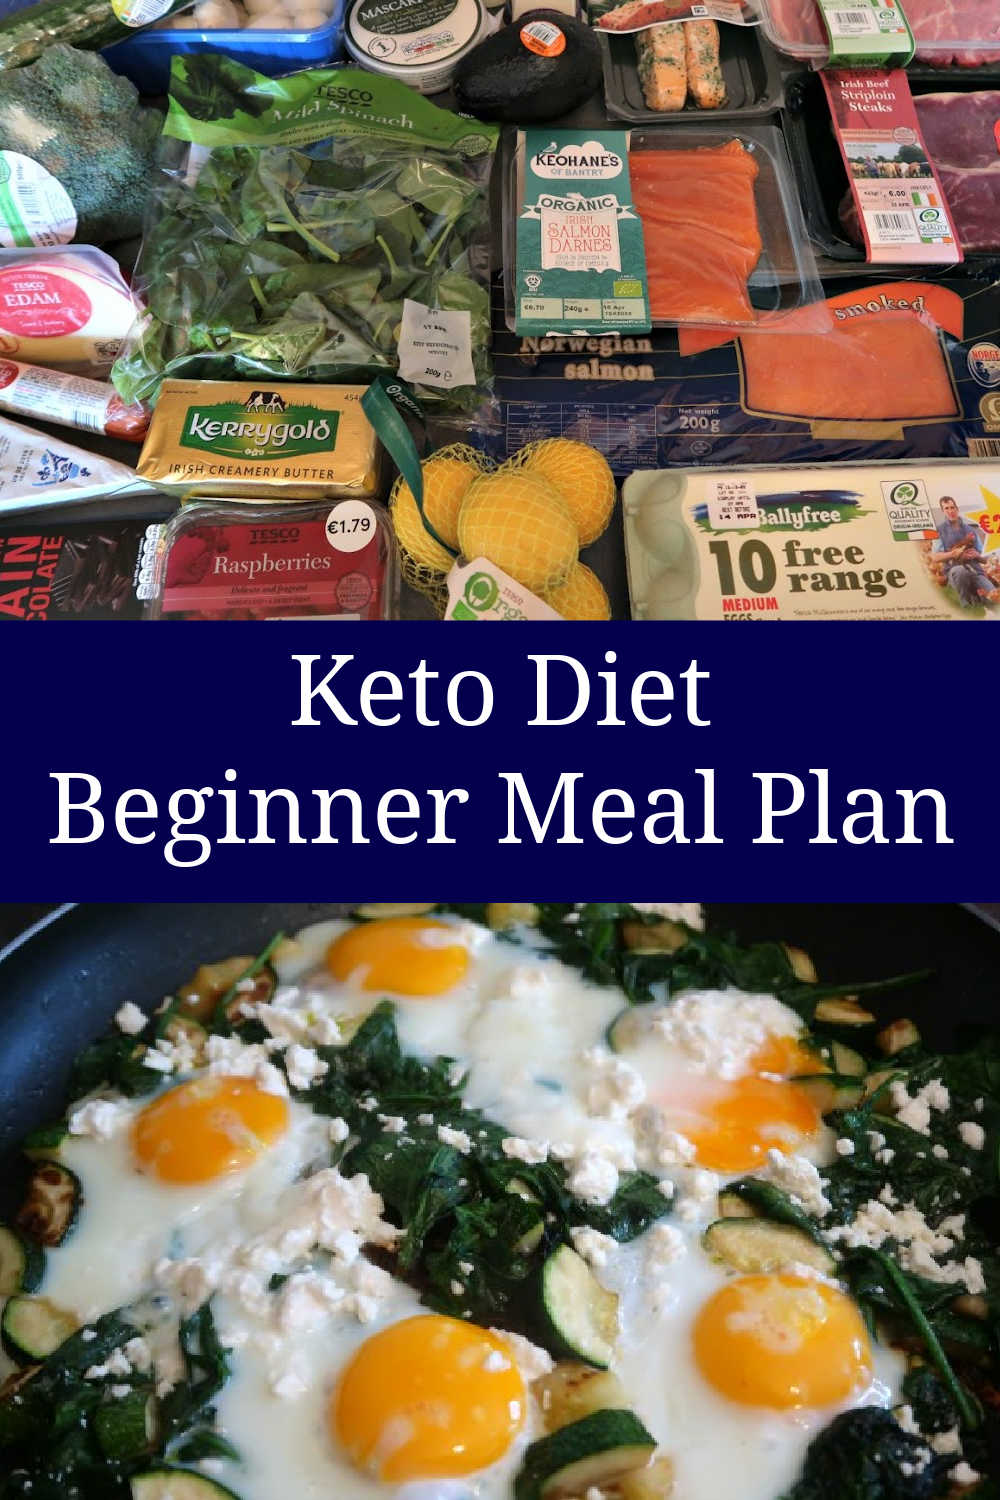 Keto Beginner Meal Plan - guide with the best keto recipes, tips and shopping list to help you getting started on your first week with the low carb ketogenic diet.